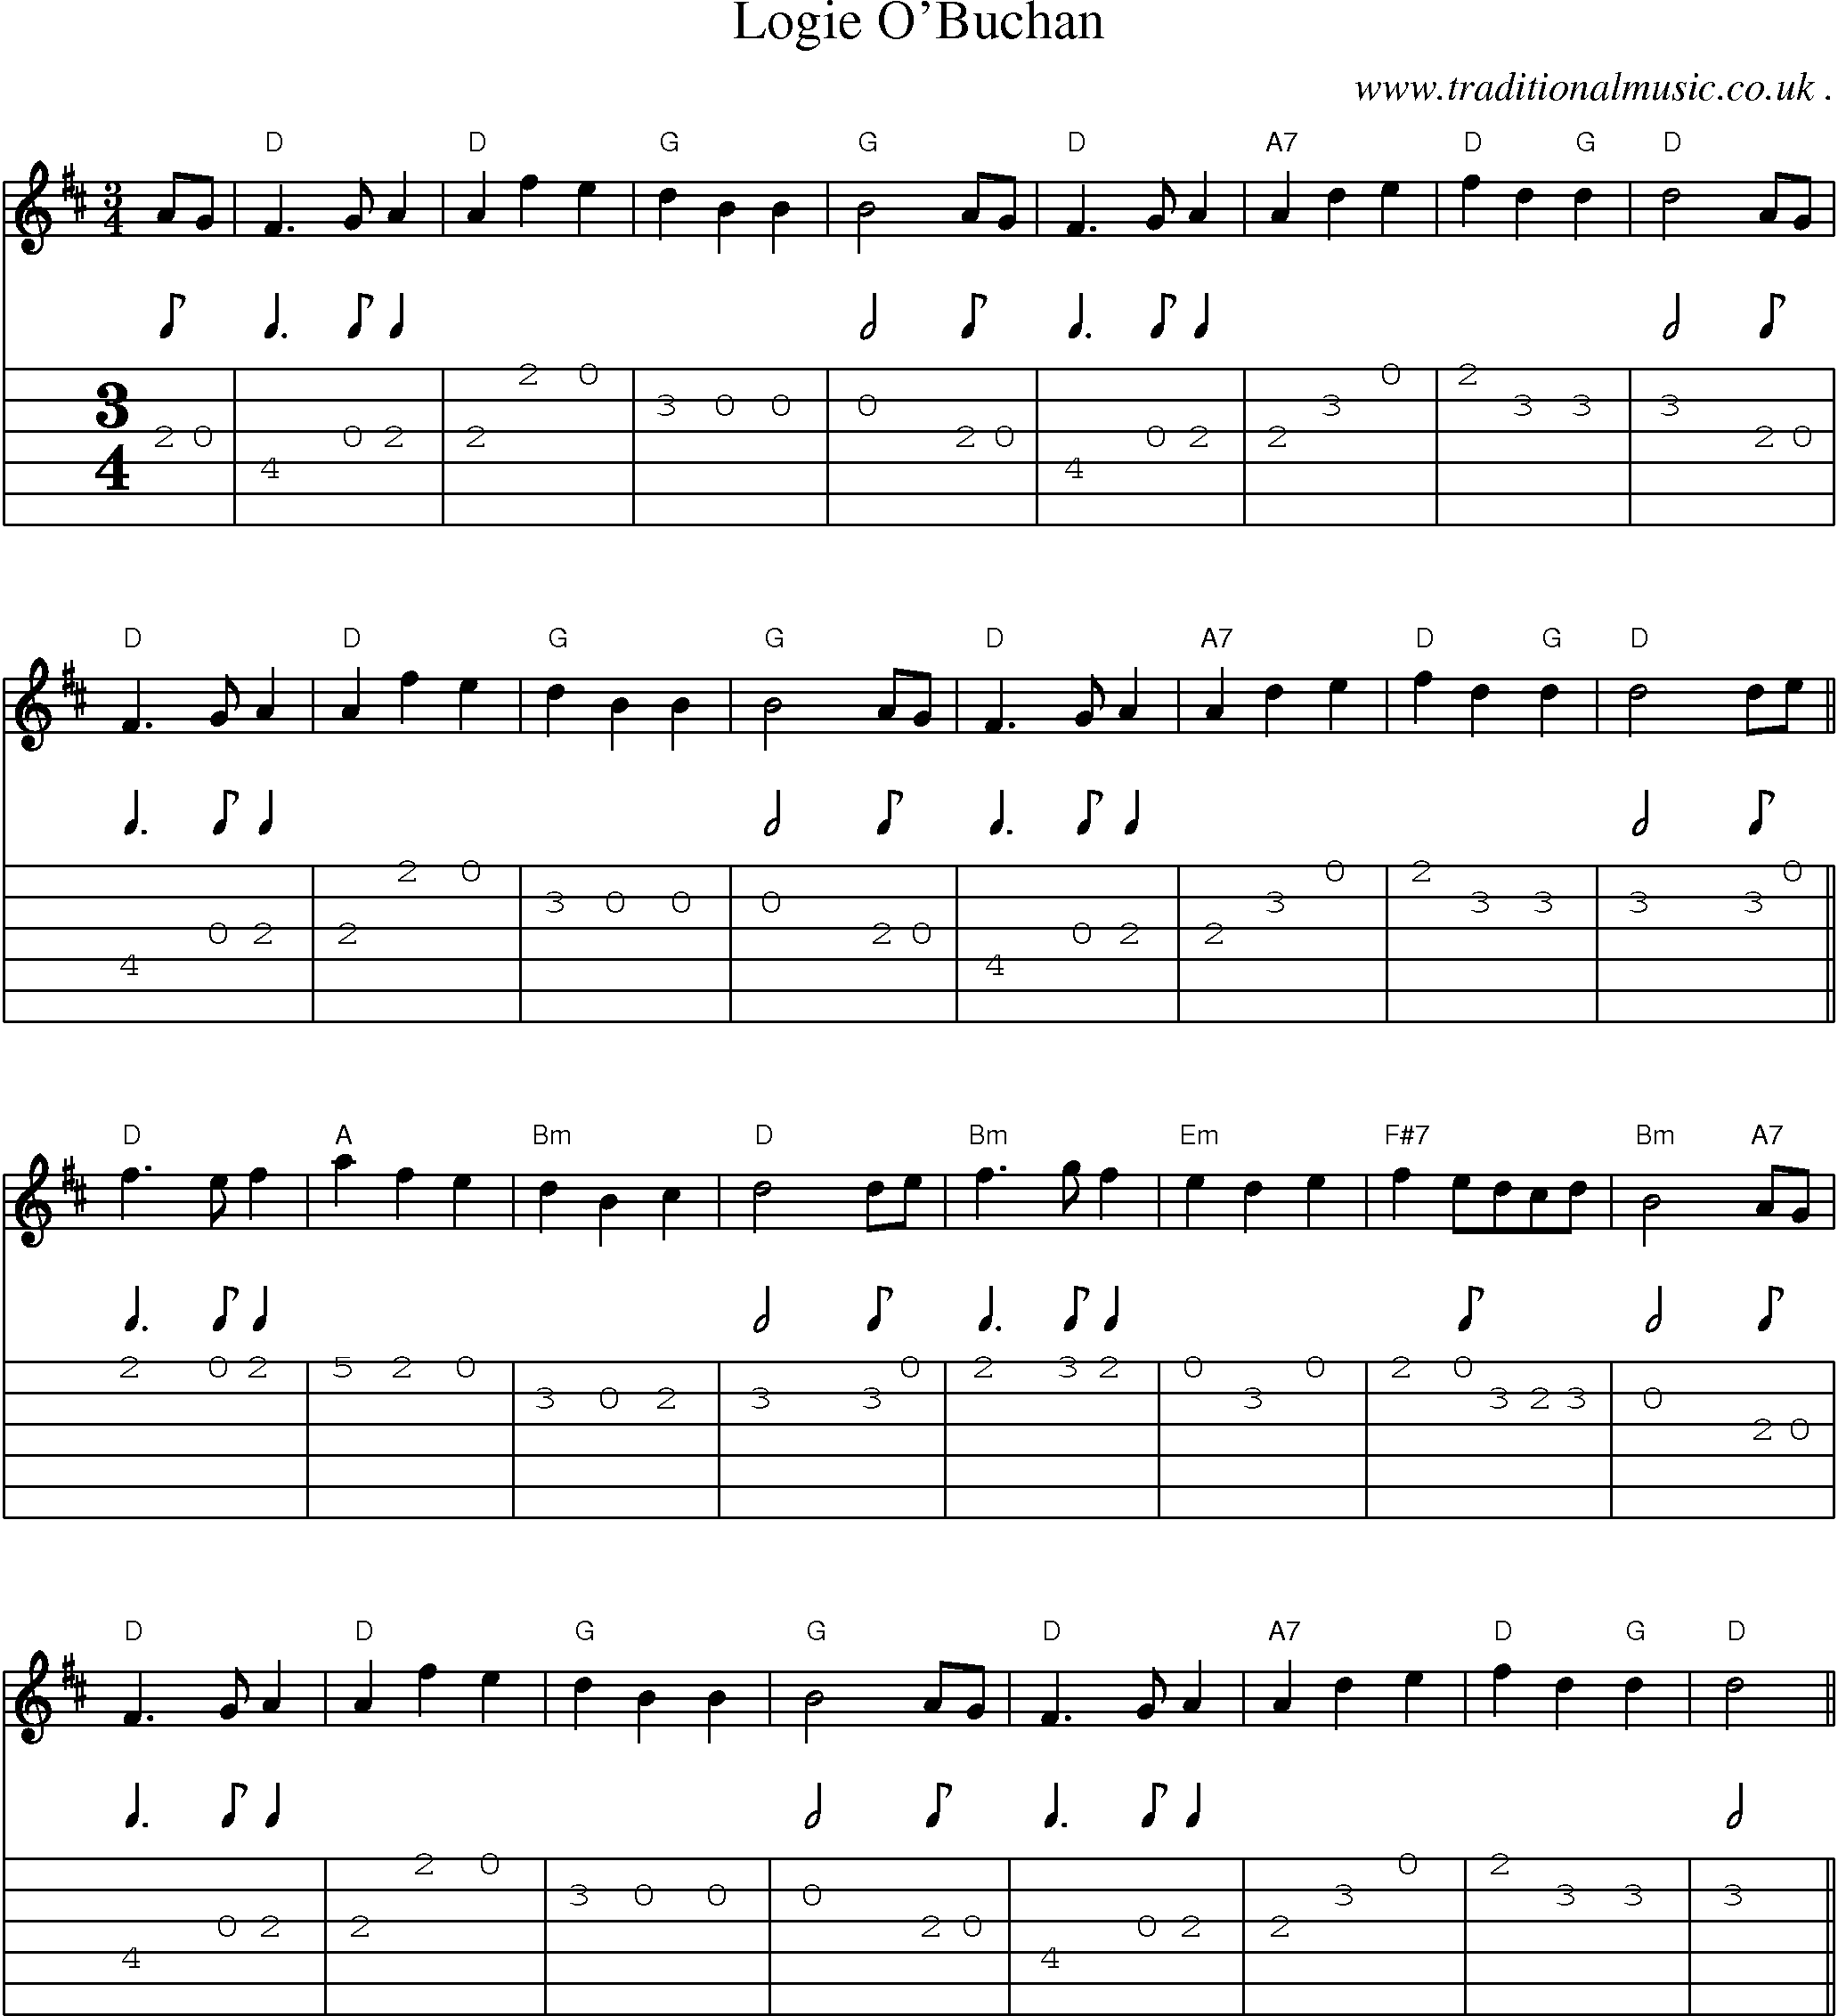 Sheet-Music and Guitar Tabs for Logie Obuchan